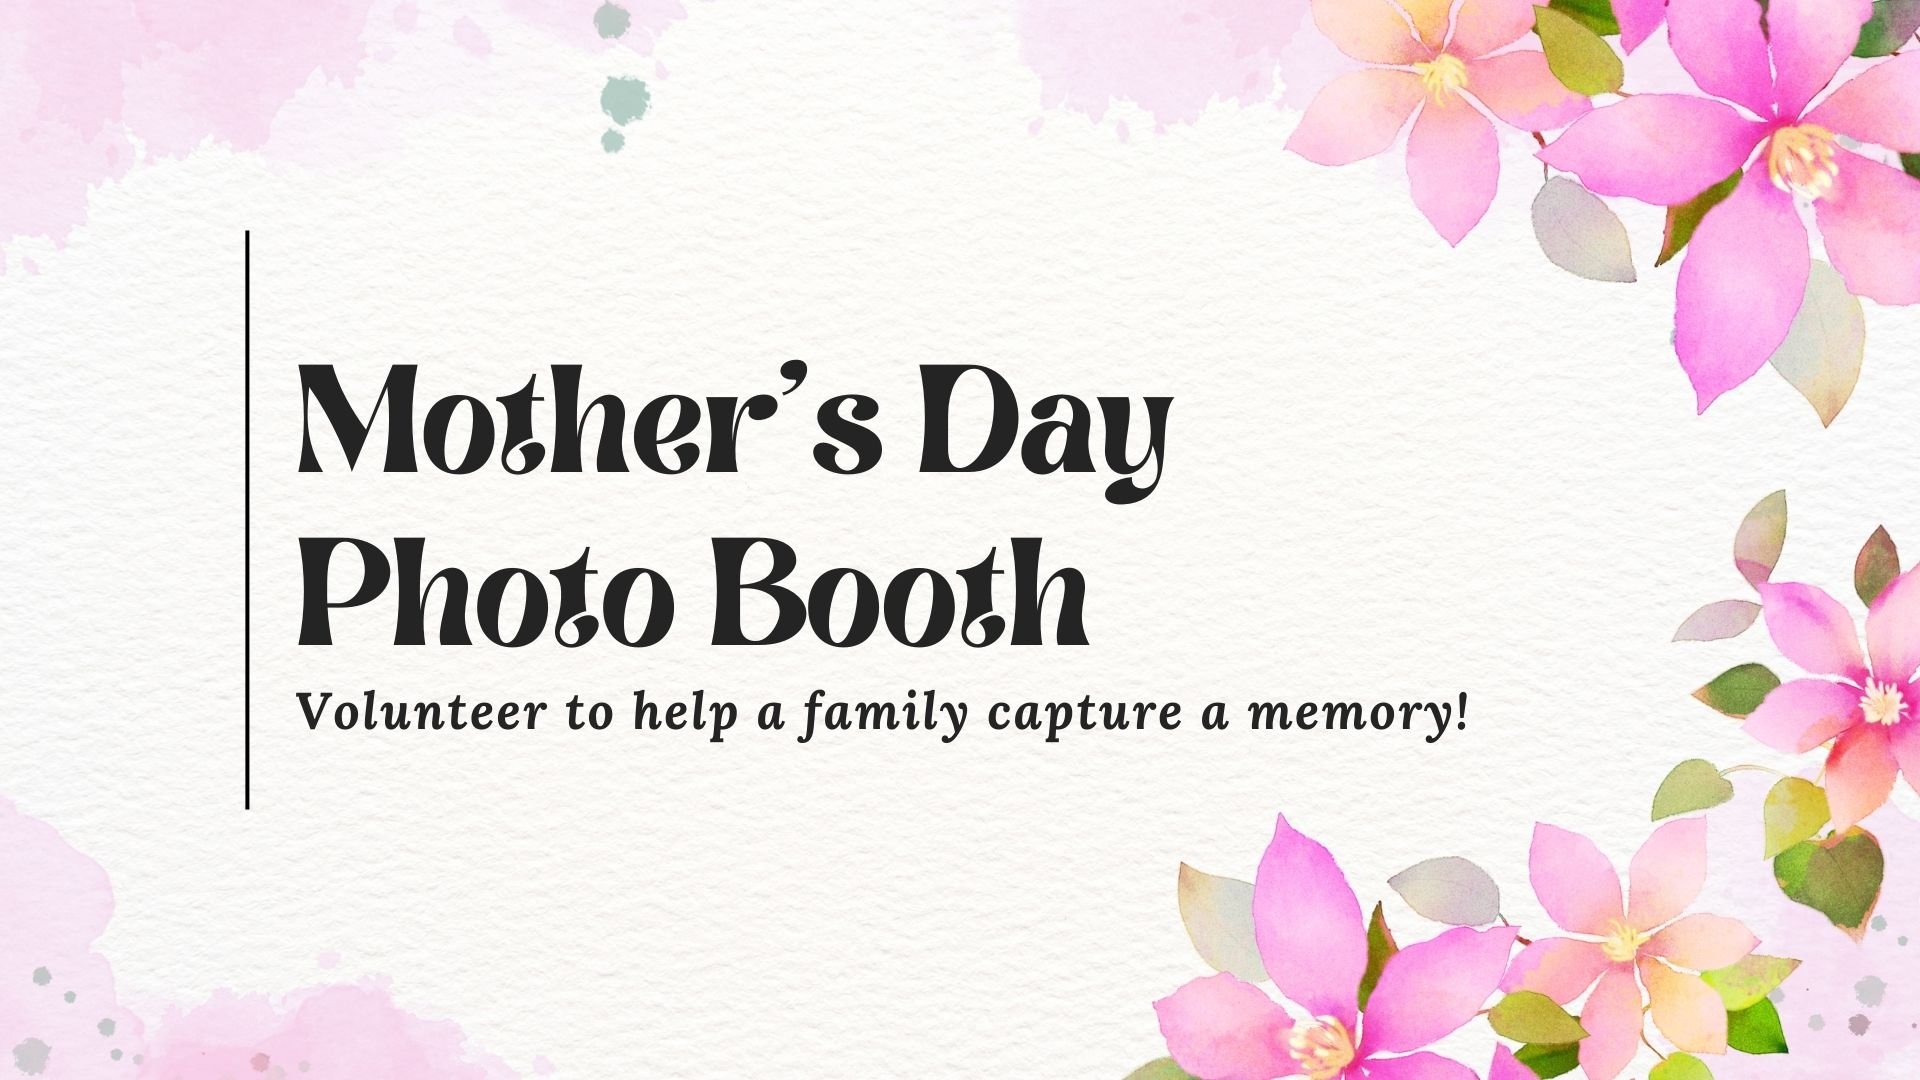 Mother’s Day Photo Booth - volunteer to help!.jpg